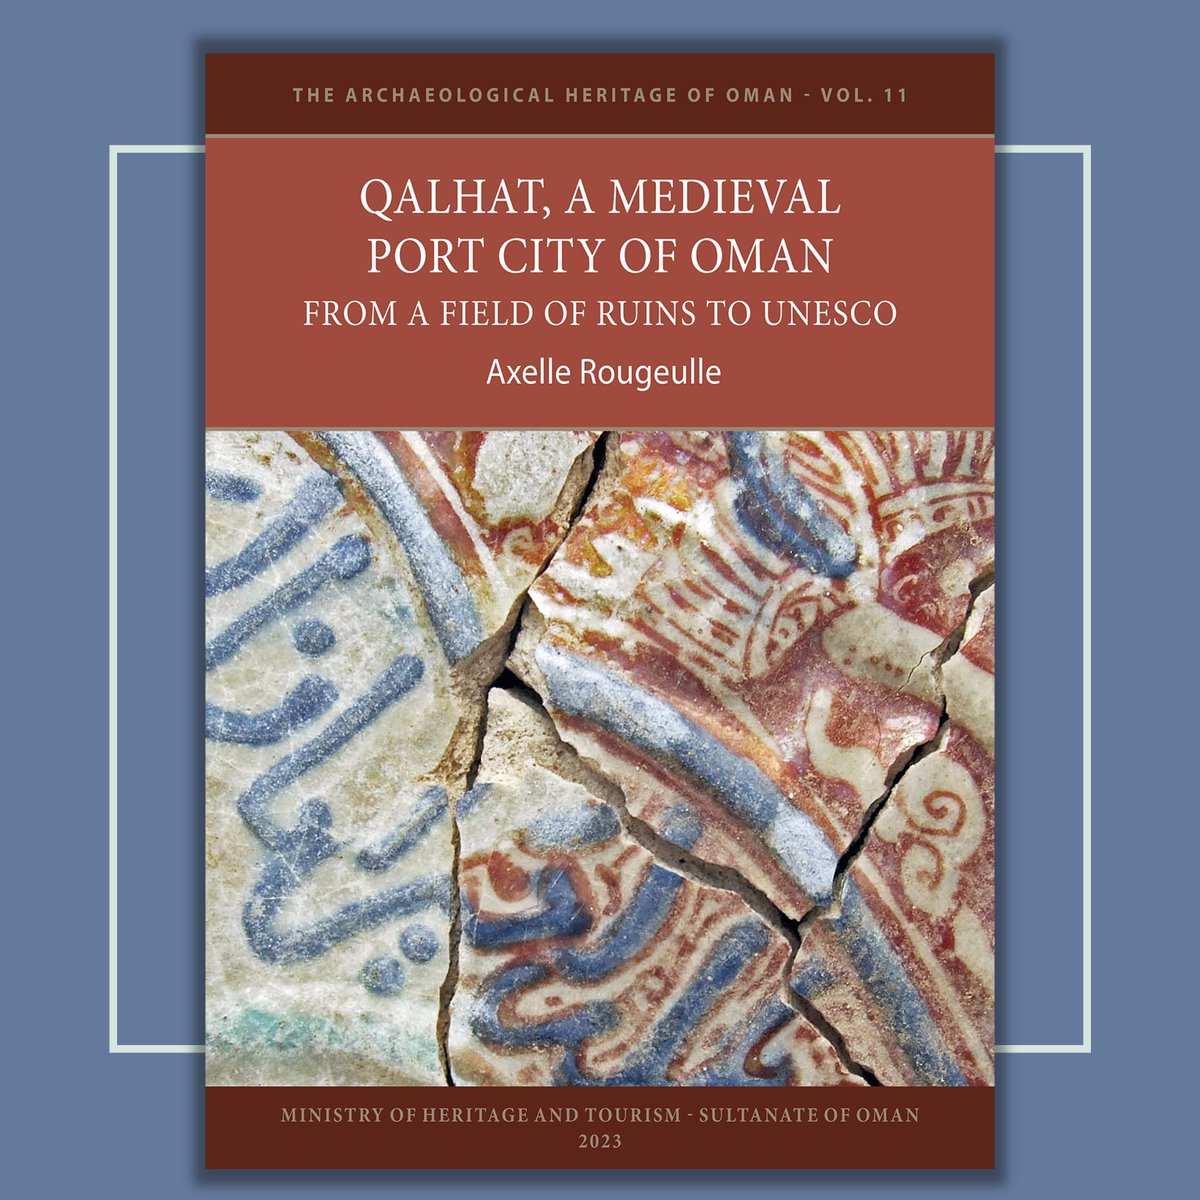 This volume reconstructs the craft & economic activities of the city, the regional & int'l. commercial links of the port, and the daily life of its inhabitants to reveal the wealth and cosmopolitan character of an ancient metropolis. tinyurl.com/Qalhat #medievaltwitter